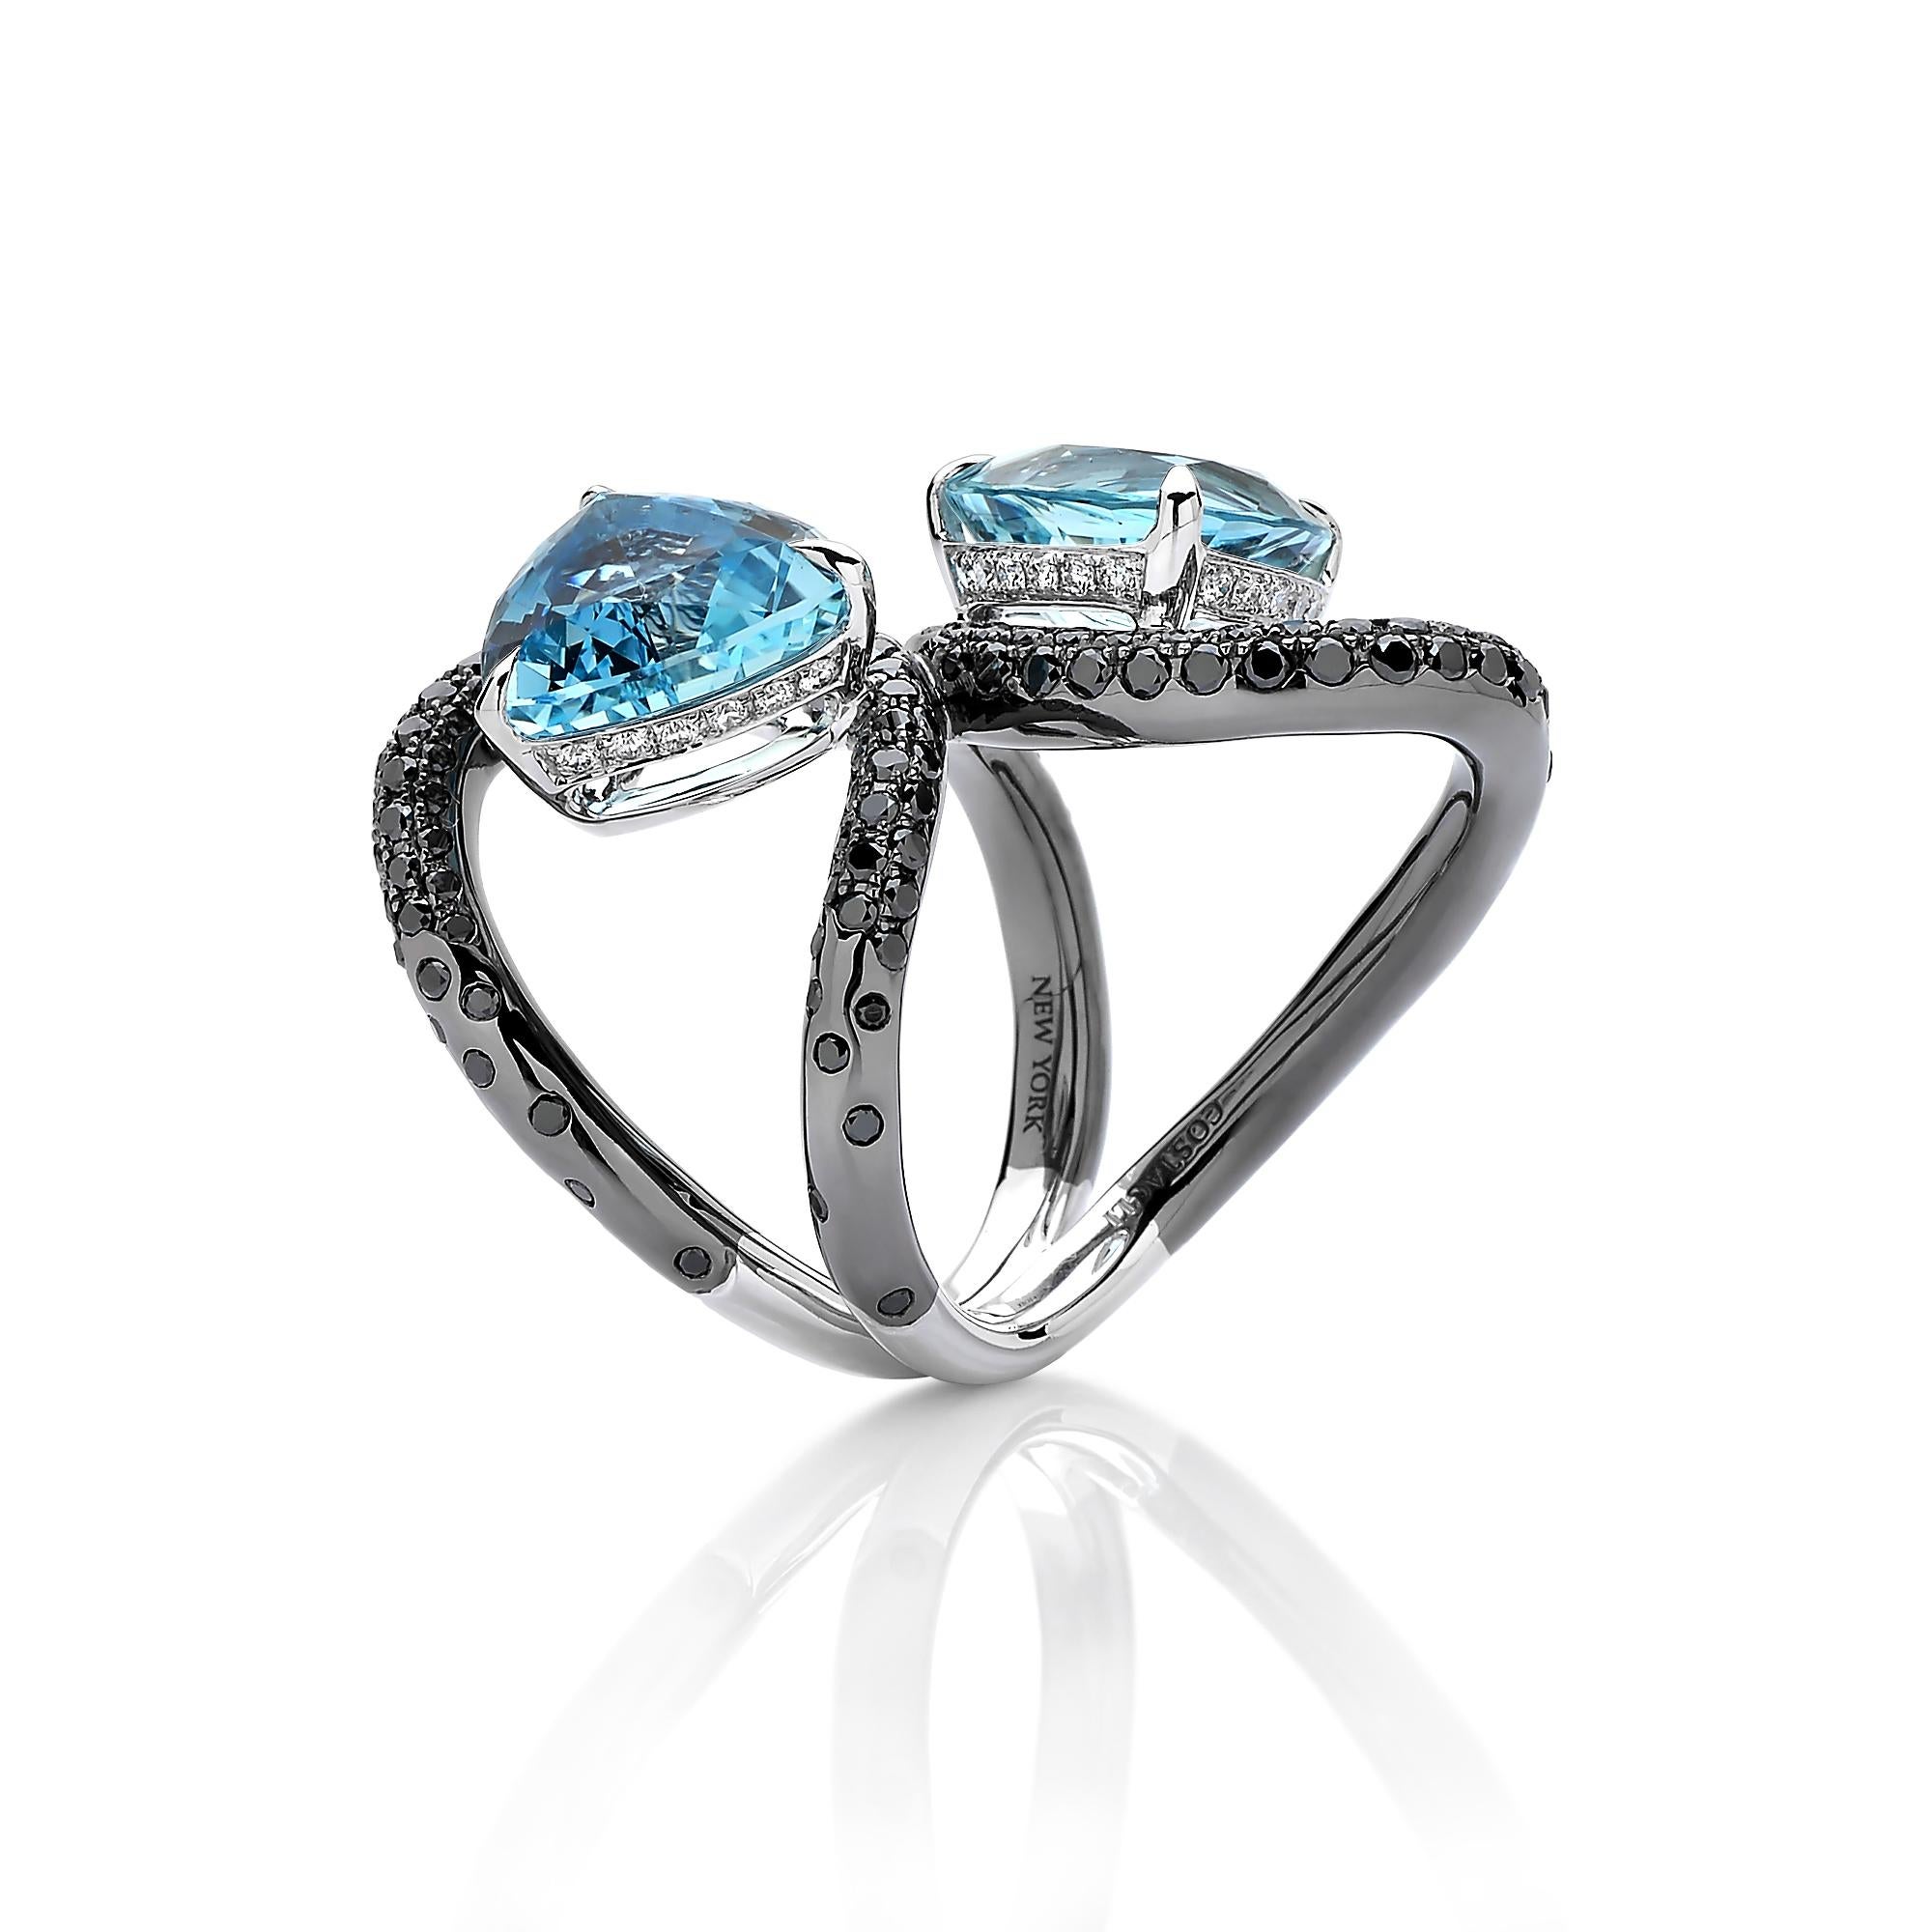 From the 'Intrecci' Collection, one-of-a-kind double trillion cut aquamarine ring set in 18 karat white gold with black rhodium finish and pave-set black diamond detailing. 

The beauty is in the details - from the combination of hues, the color of